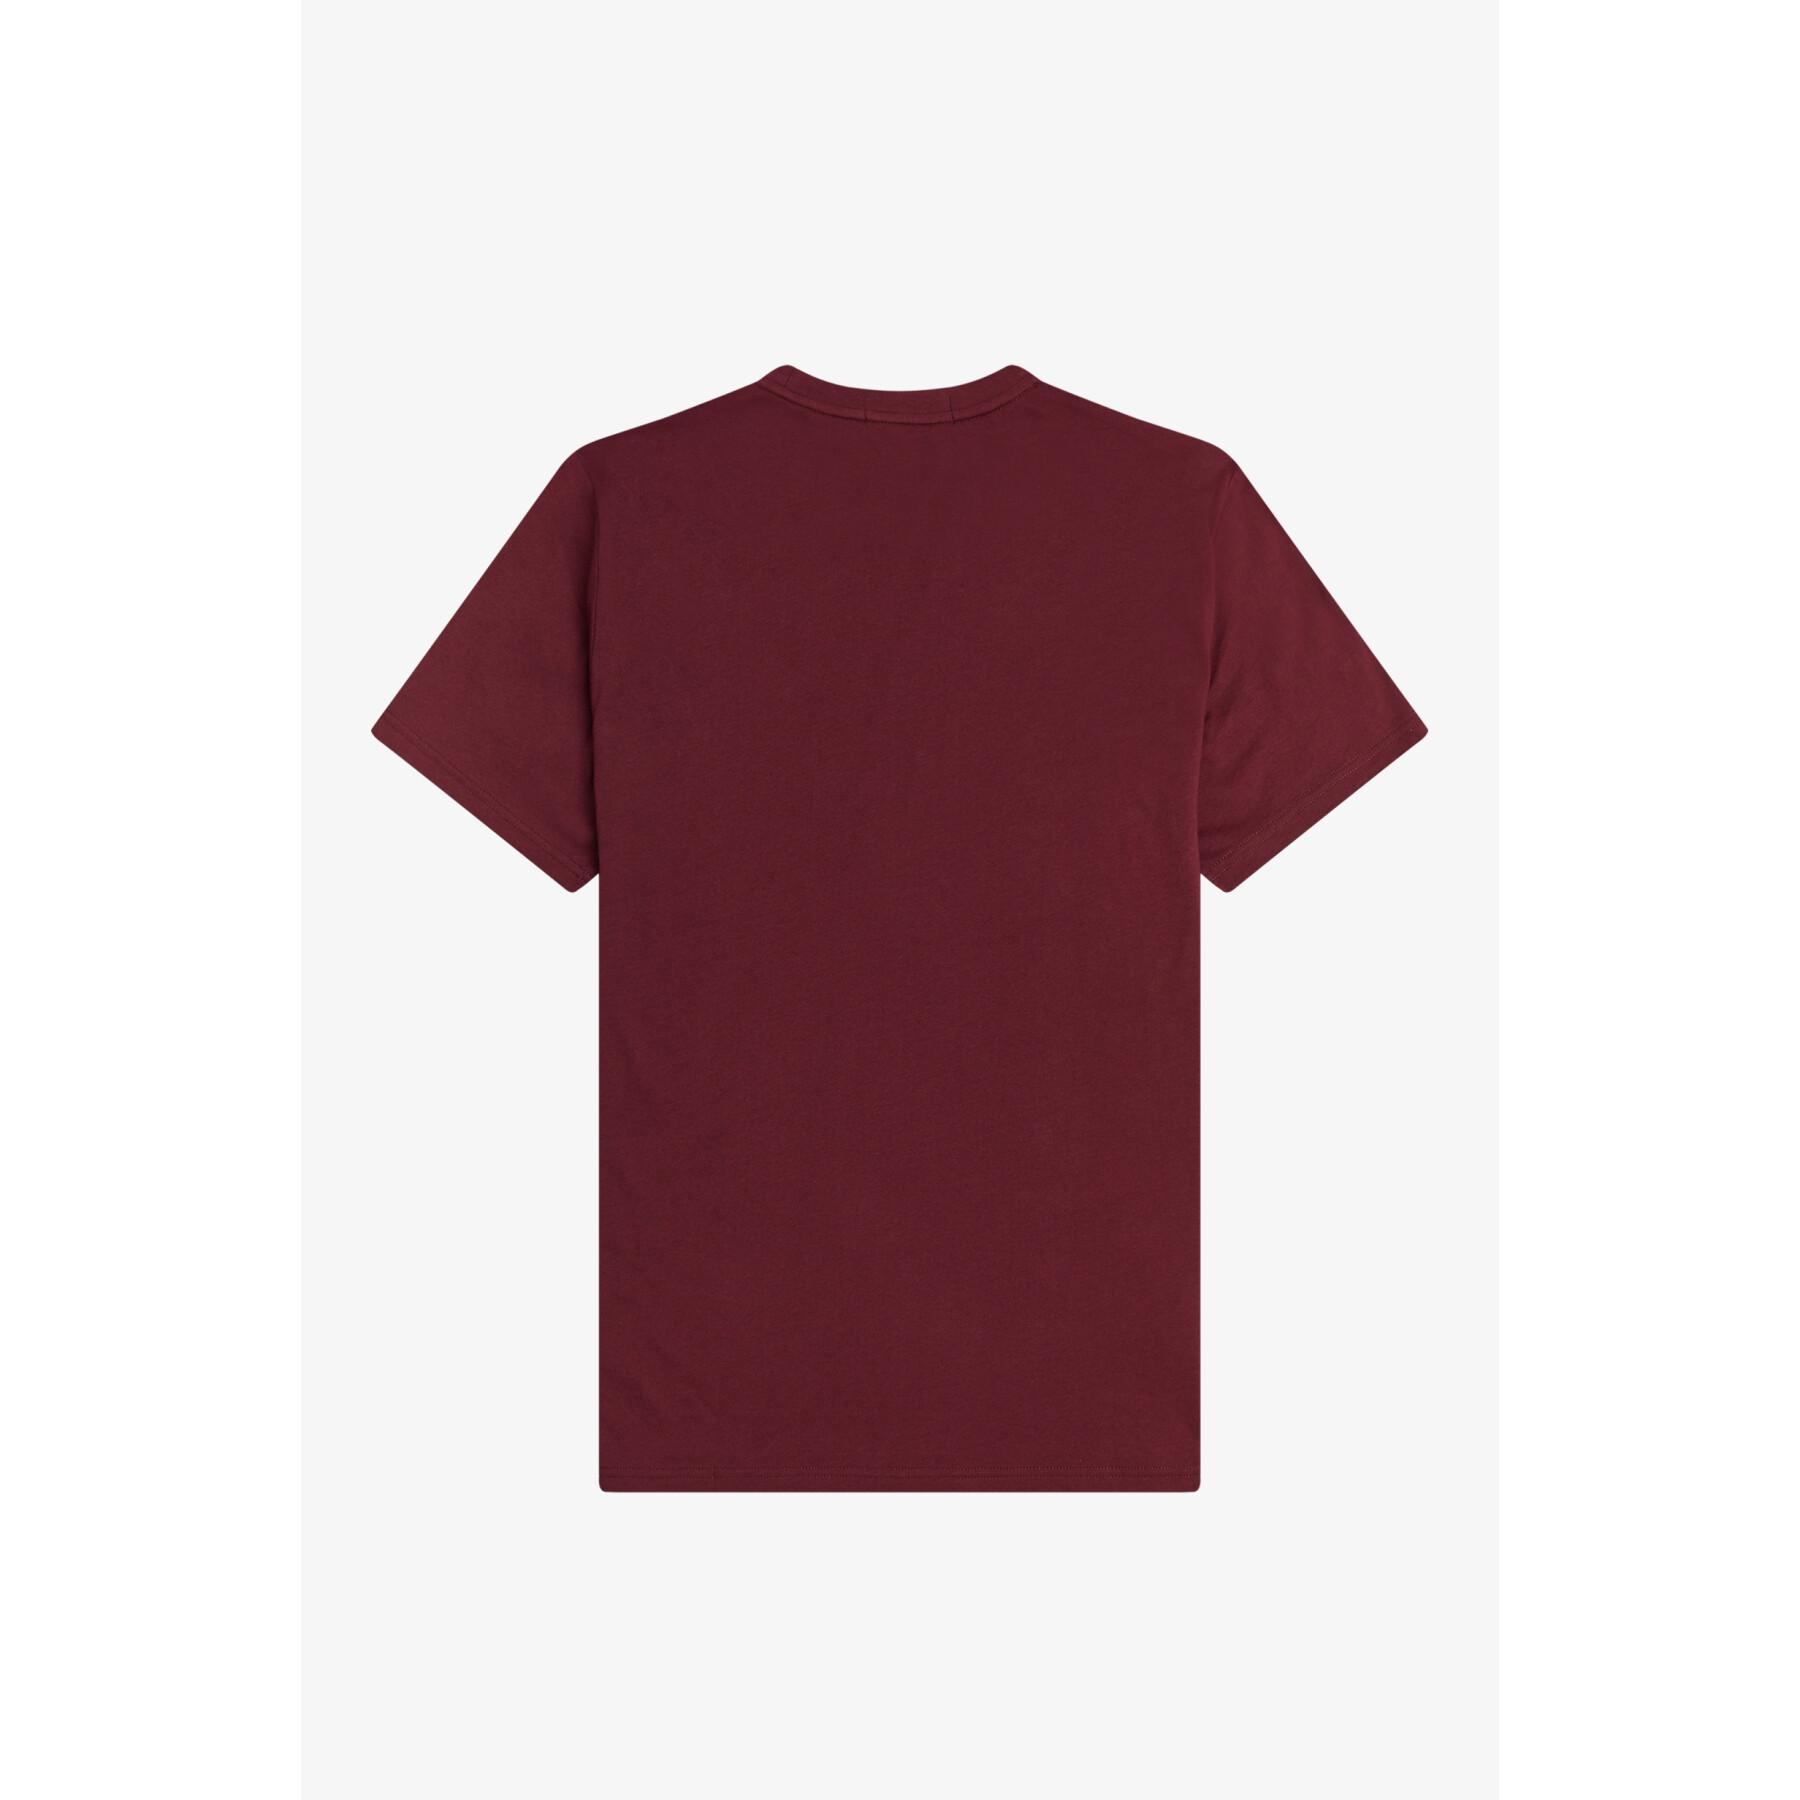 T-shirt Fred Perry Laurel Wreath